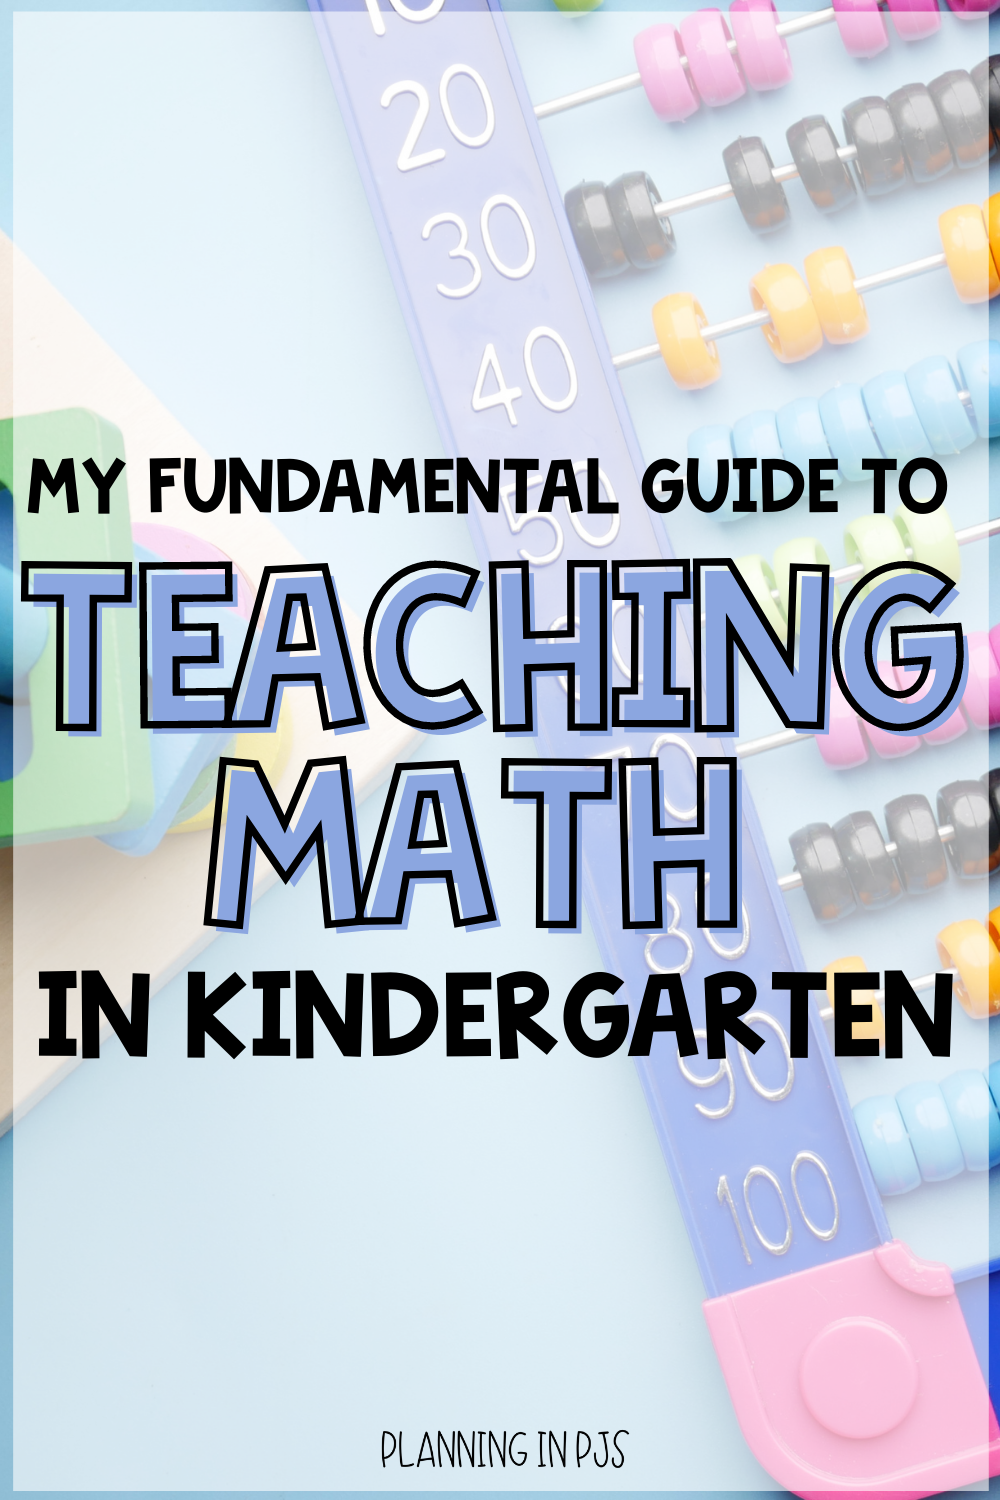 Wondering how to teach math in kindergarten? You will find a scope and sequence for teaching math, a process for teaching math, using technology, how to assess, using math centers, incorporating math into classroom life, engaging students with themes, and tips for teacher math in French. Topics include counting and cardinality, patterns, geometry (2D and 3D shapes and symmetry), measurement & data (sorting, classifying, comparing), and basic operations (simple addition & subtraction).